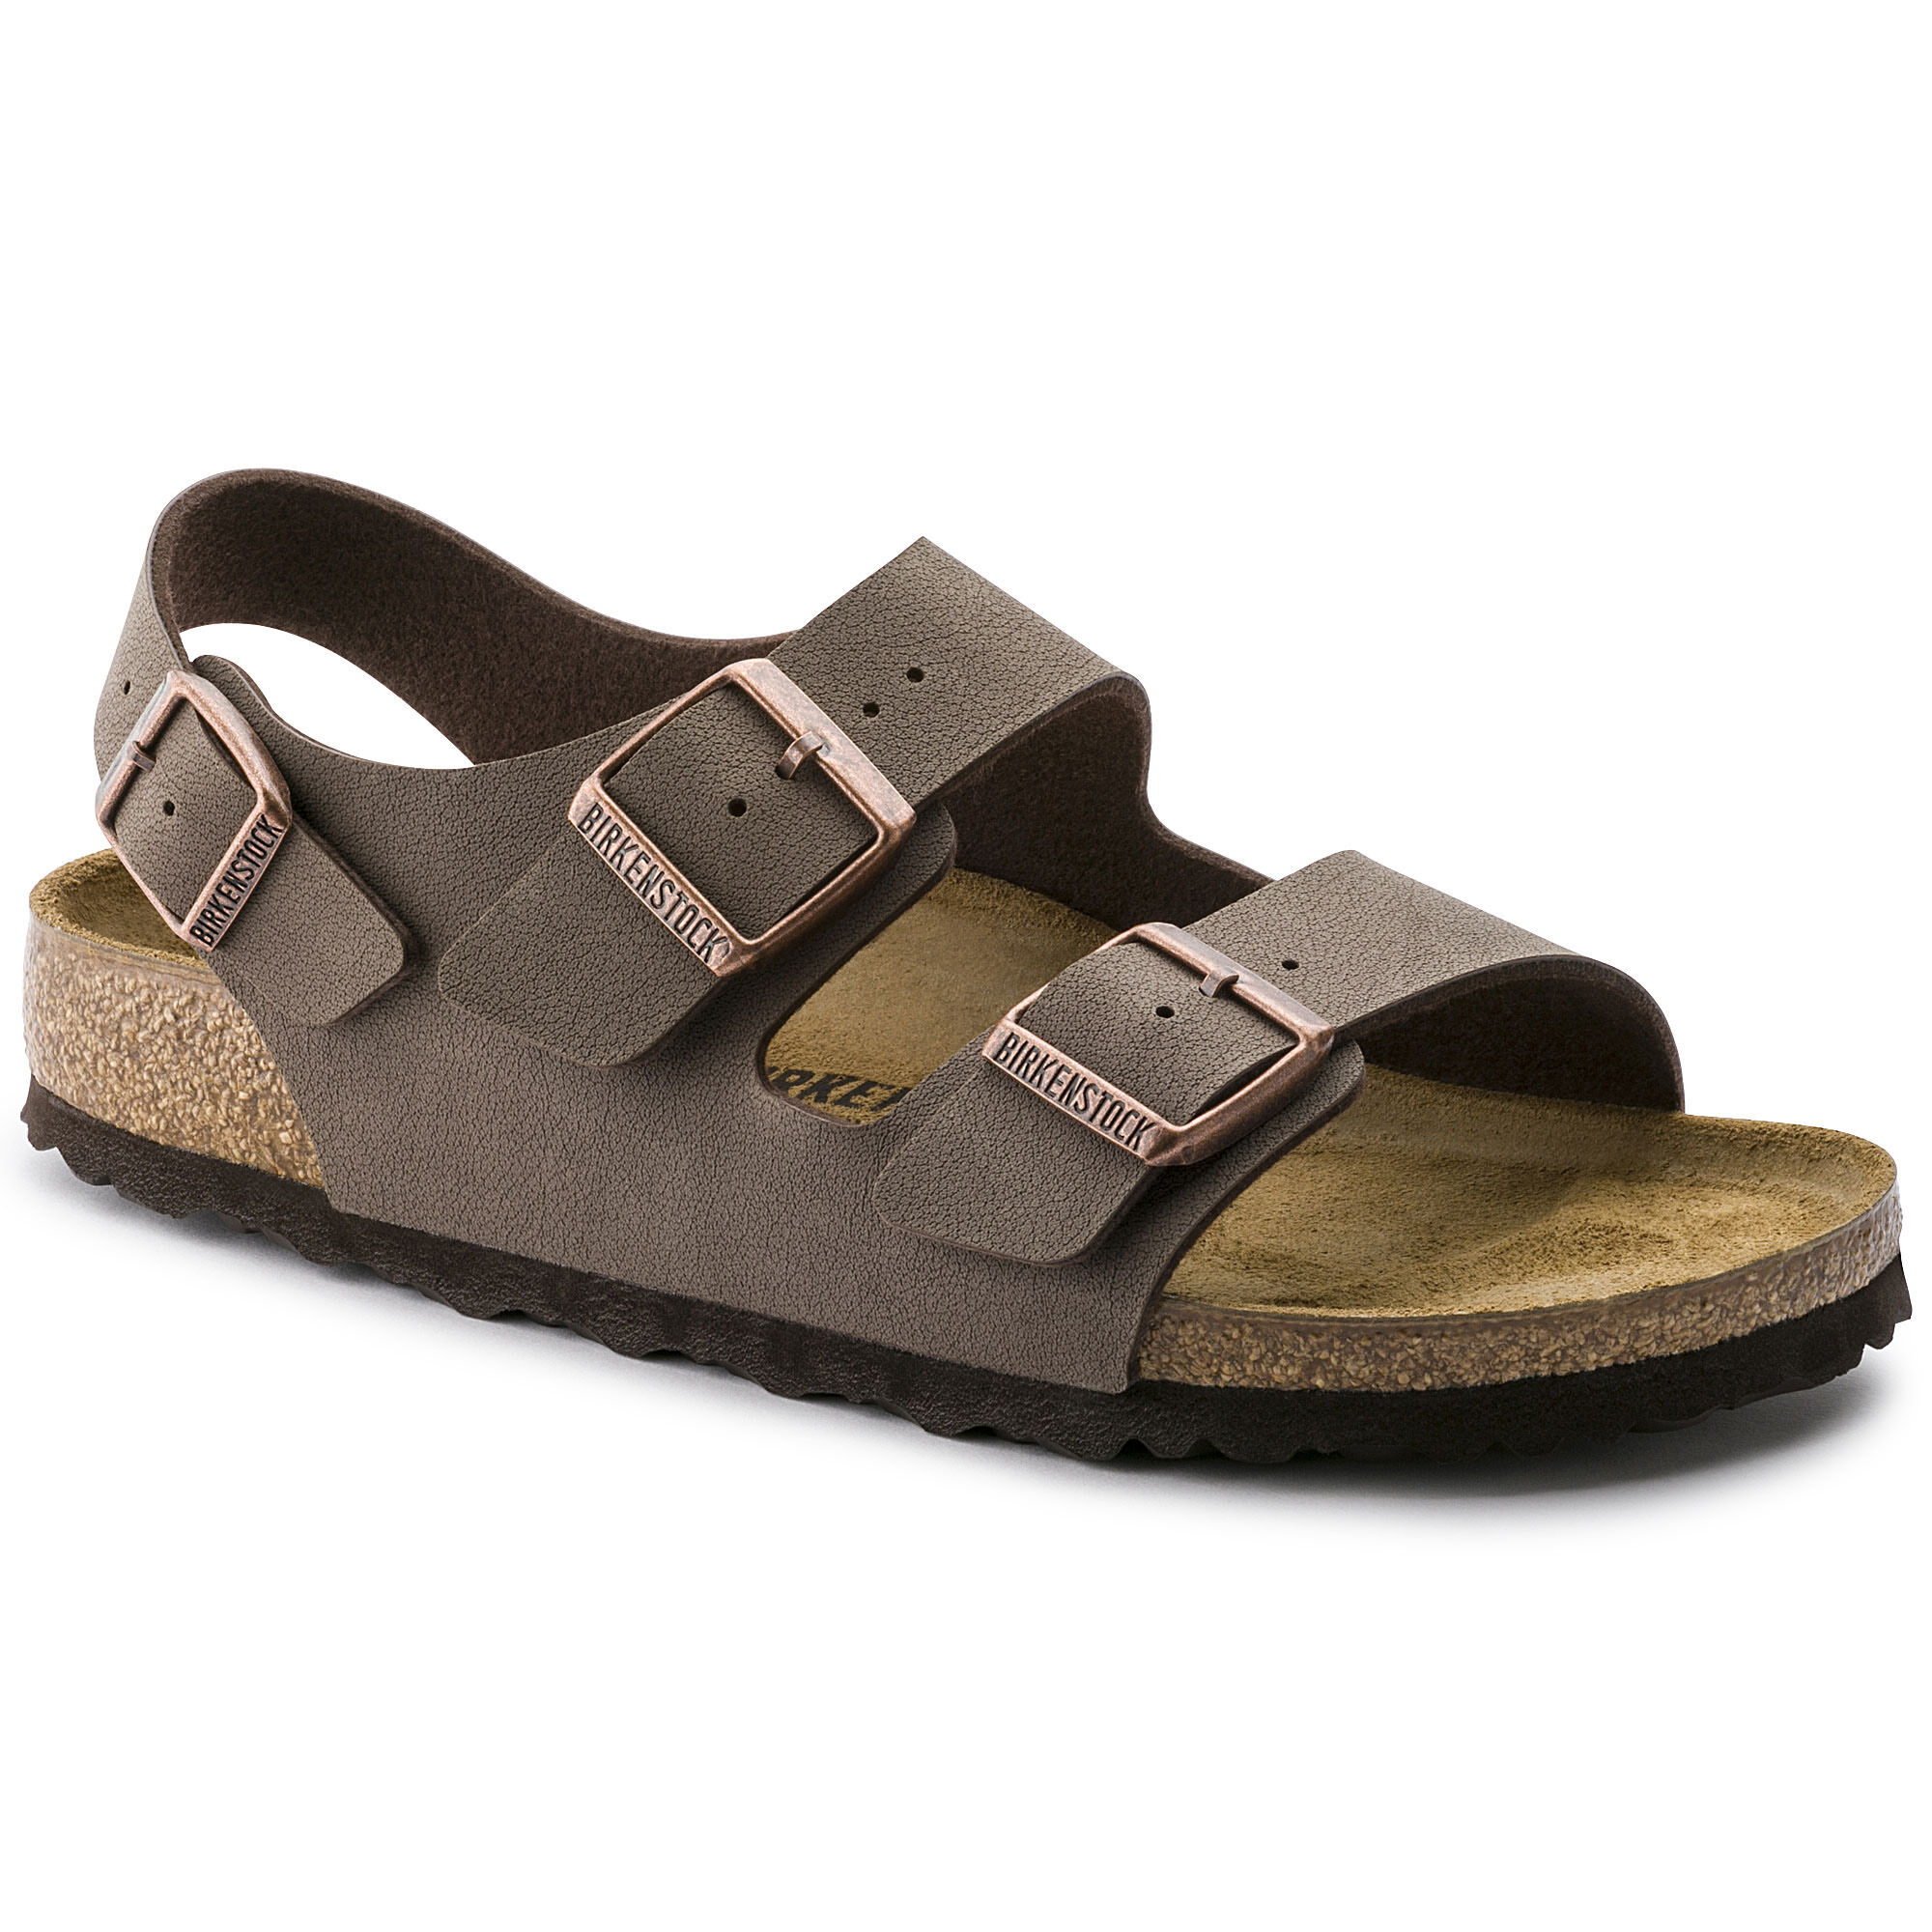 birkenstock with ankle straps